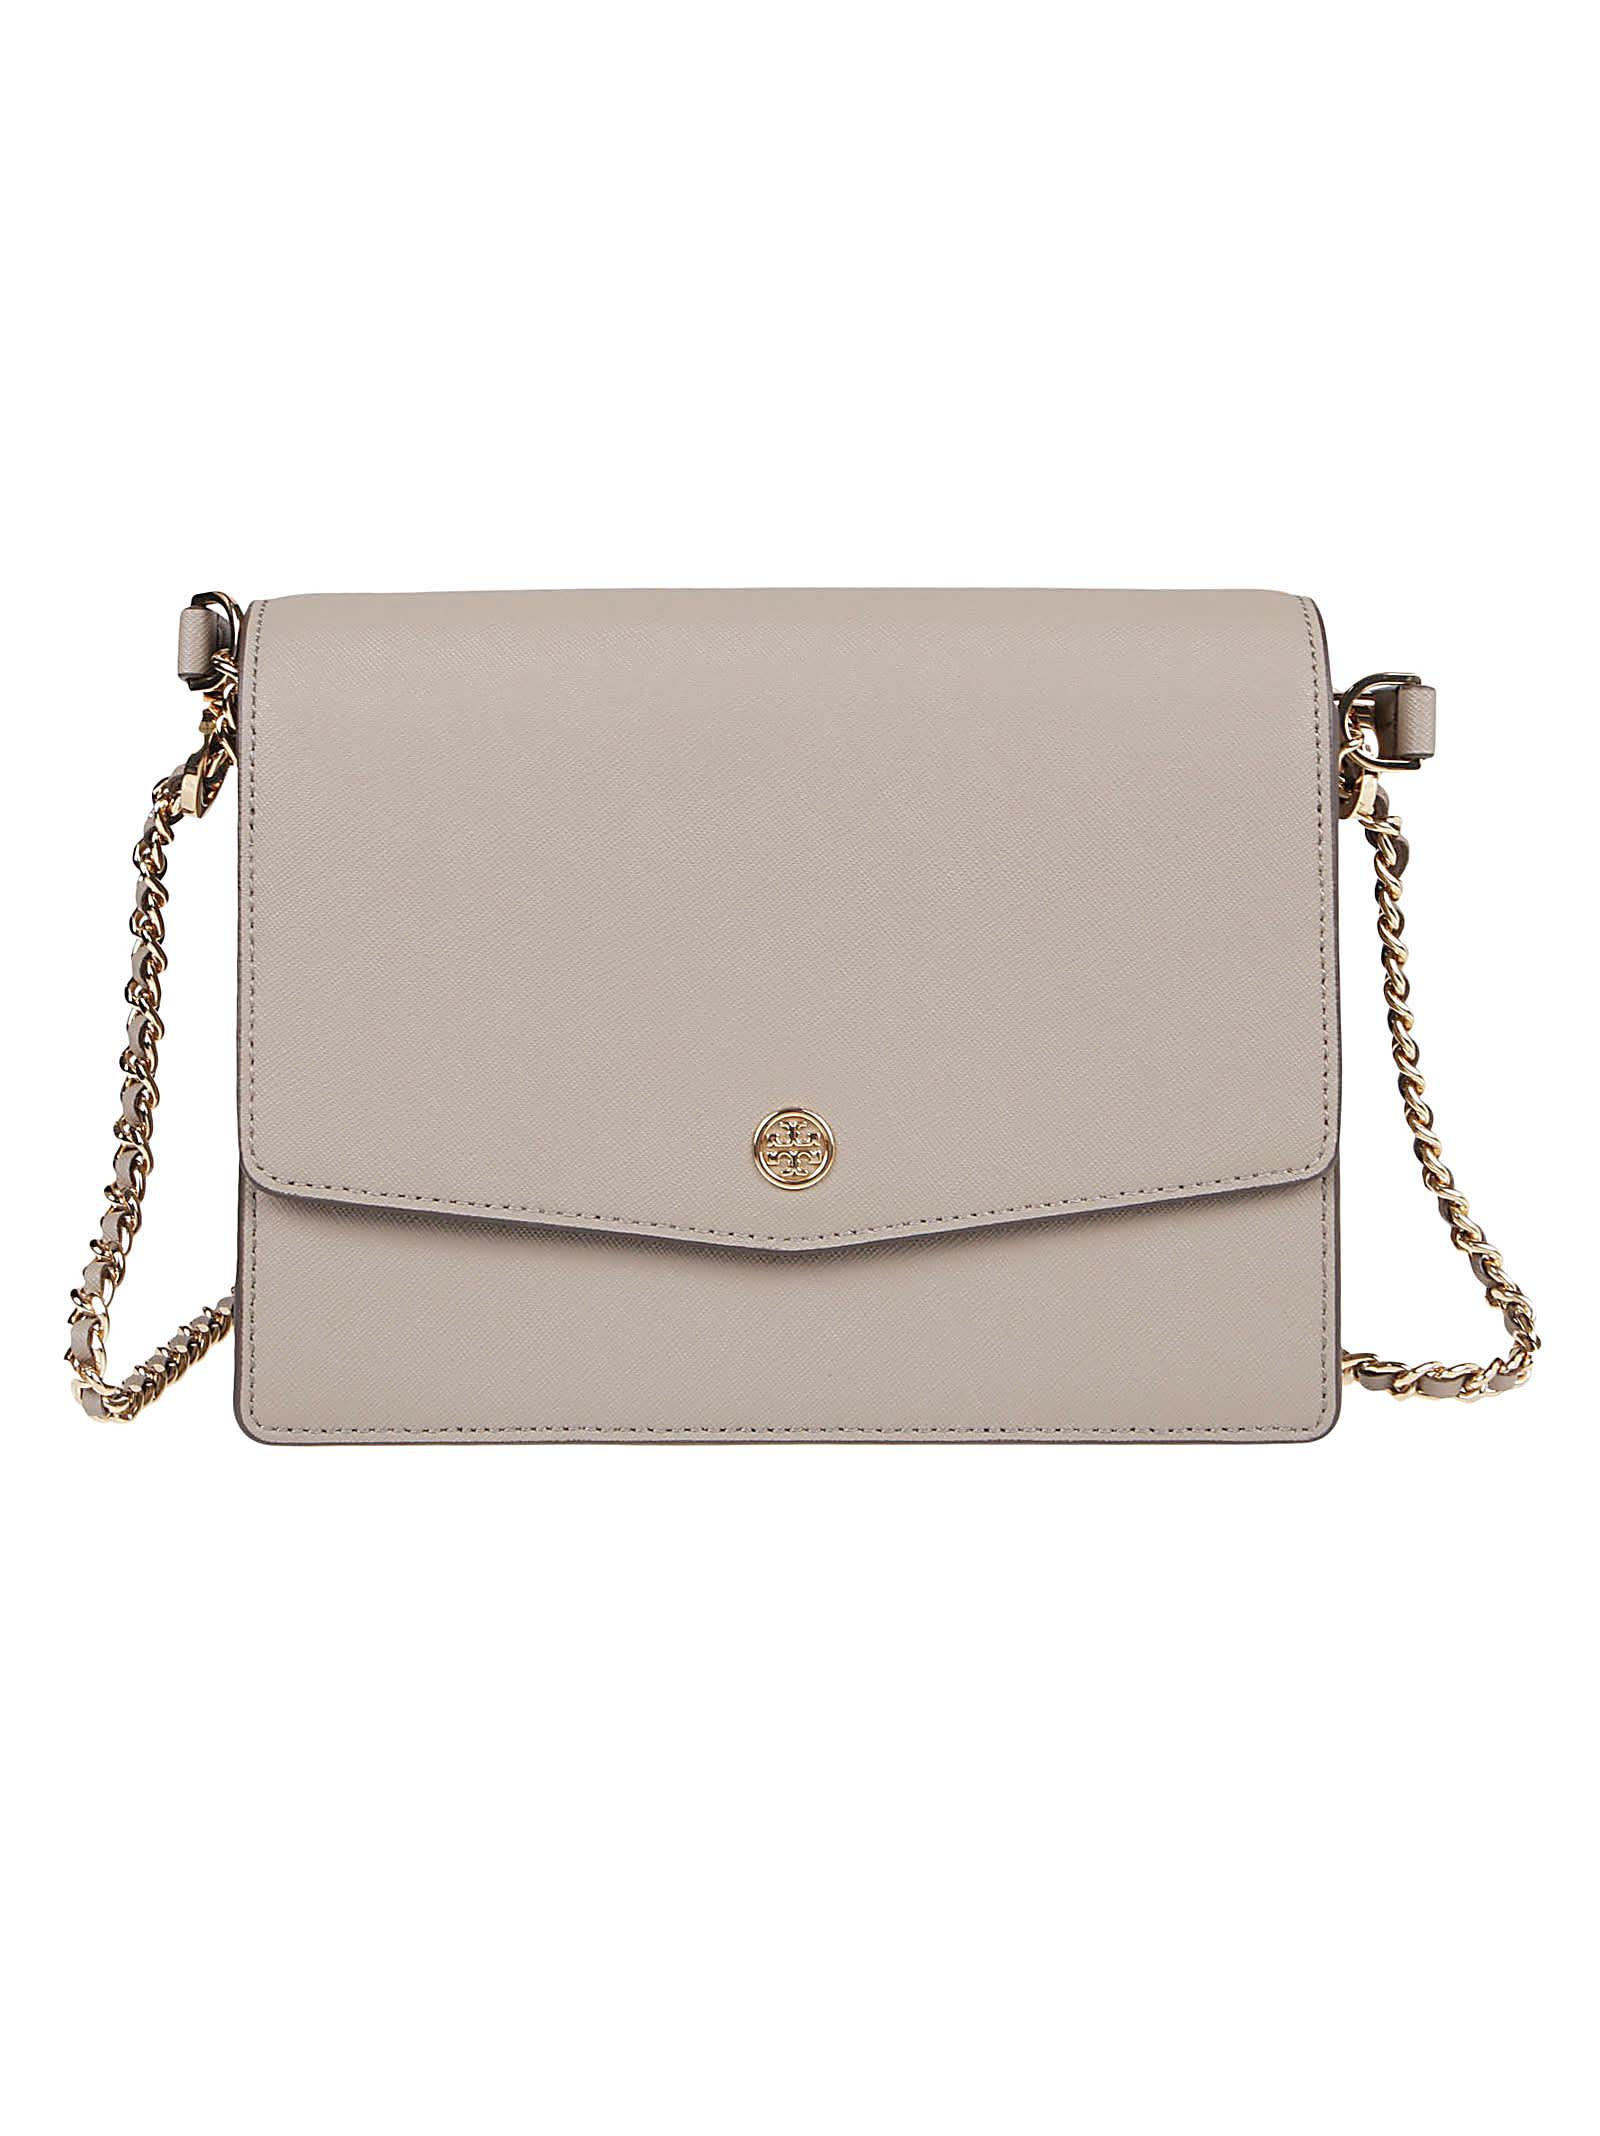 Tory Burch Robinson Convertible Shoulder Bag, Best Price and Reviews